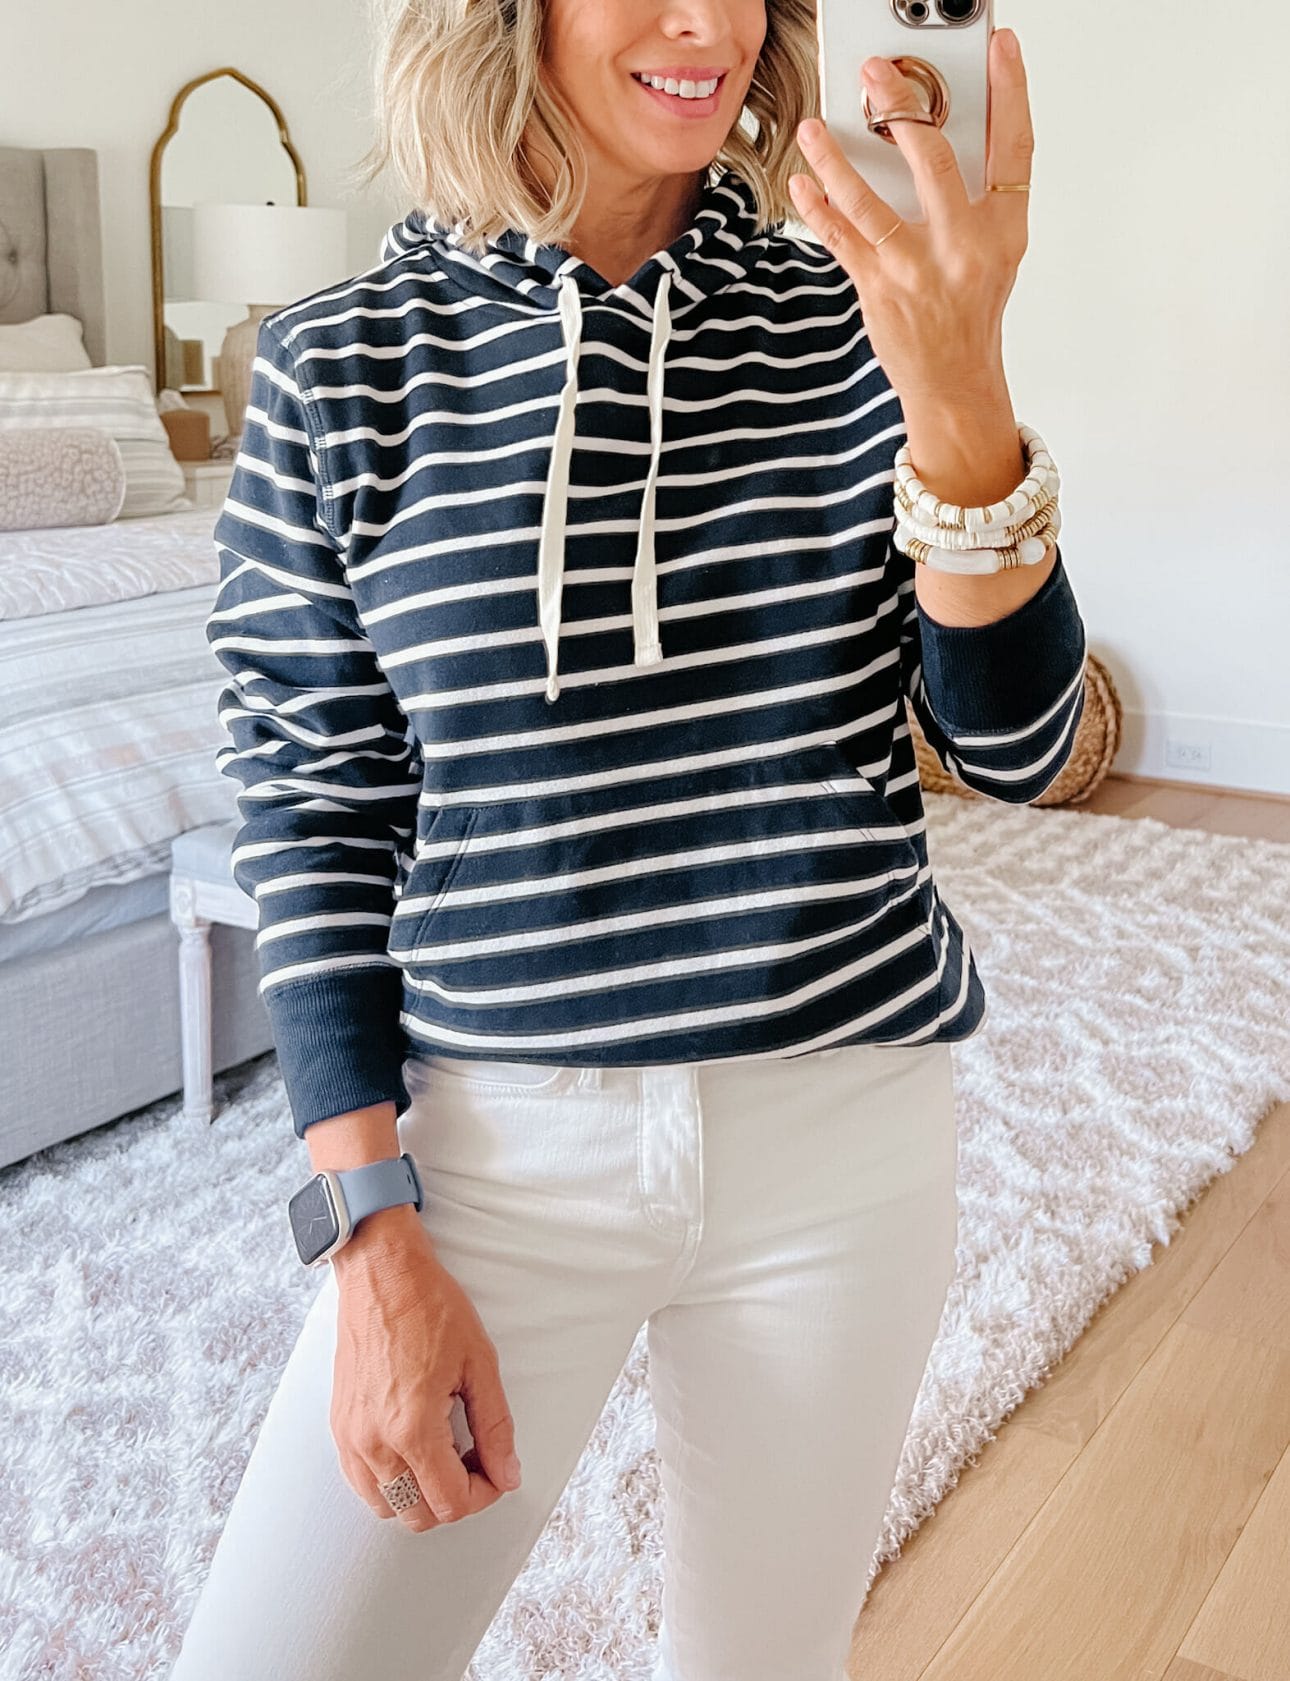 Striped Pullover, White Jeans